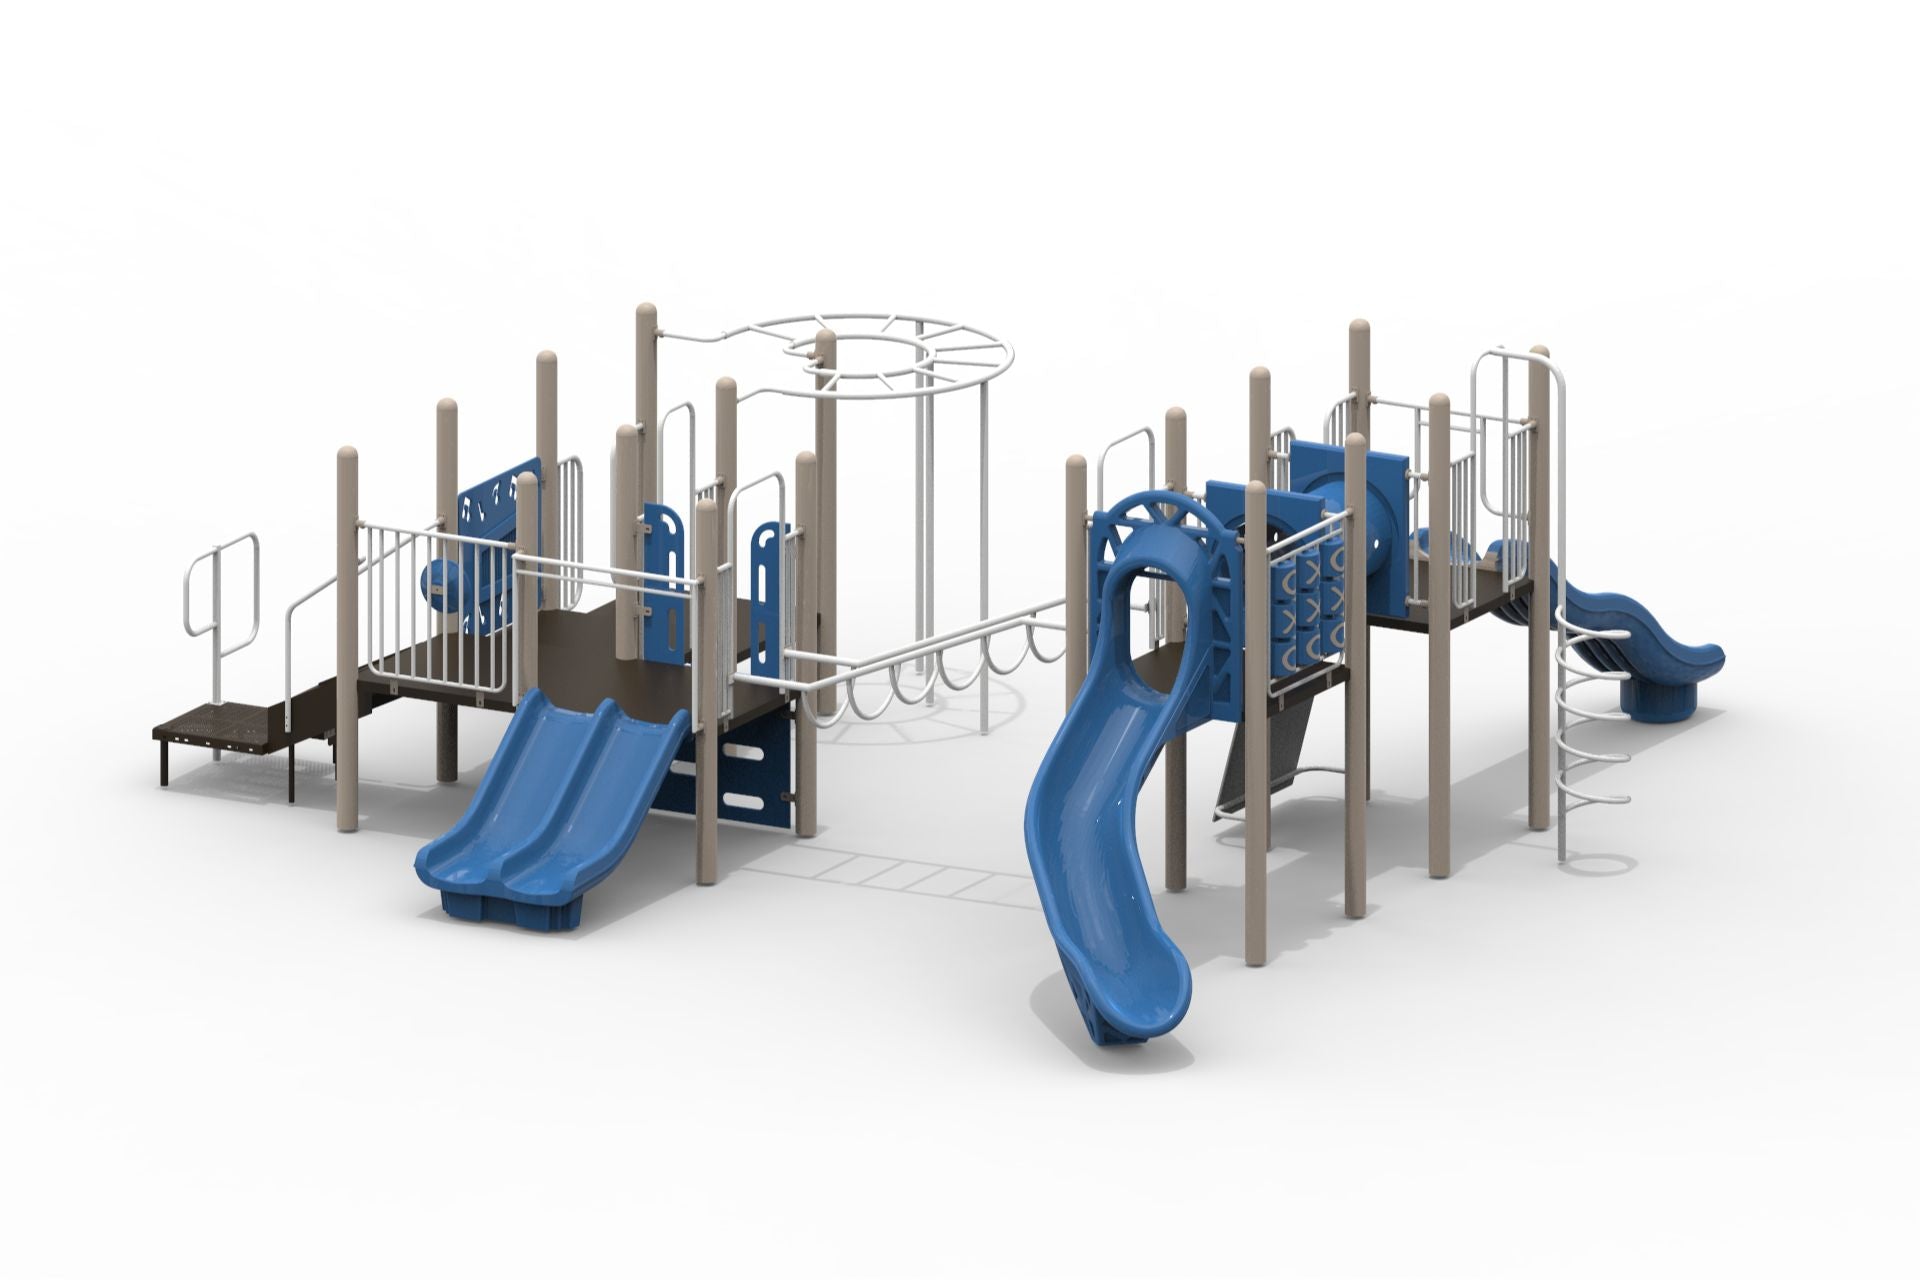 Congaree Triple Deck WillyGoat Playground